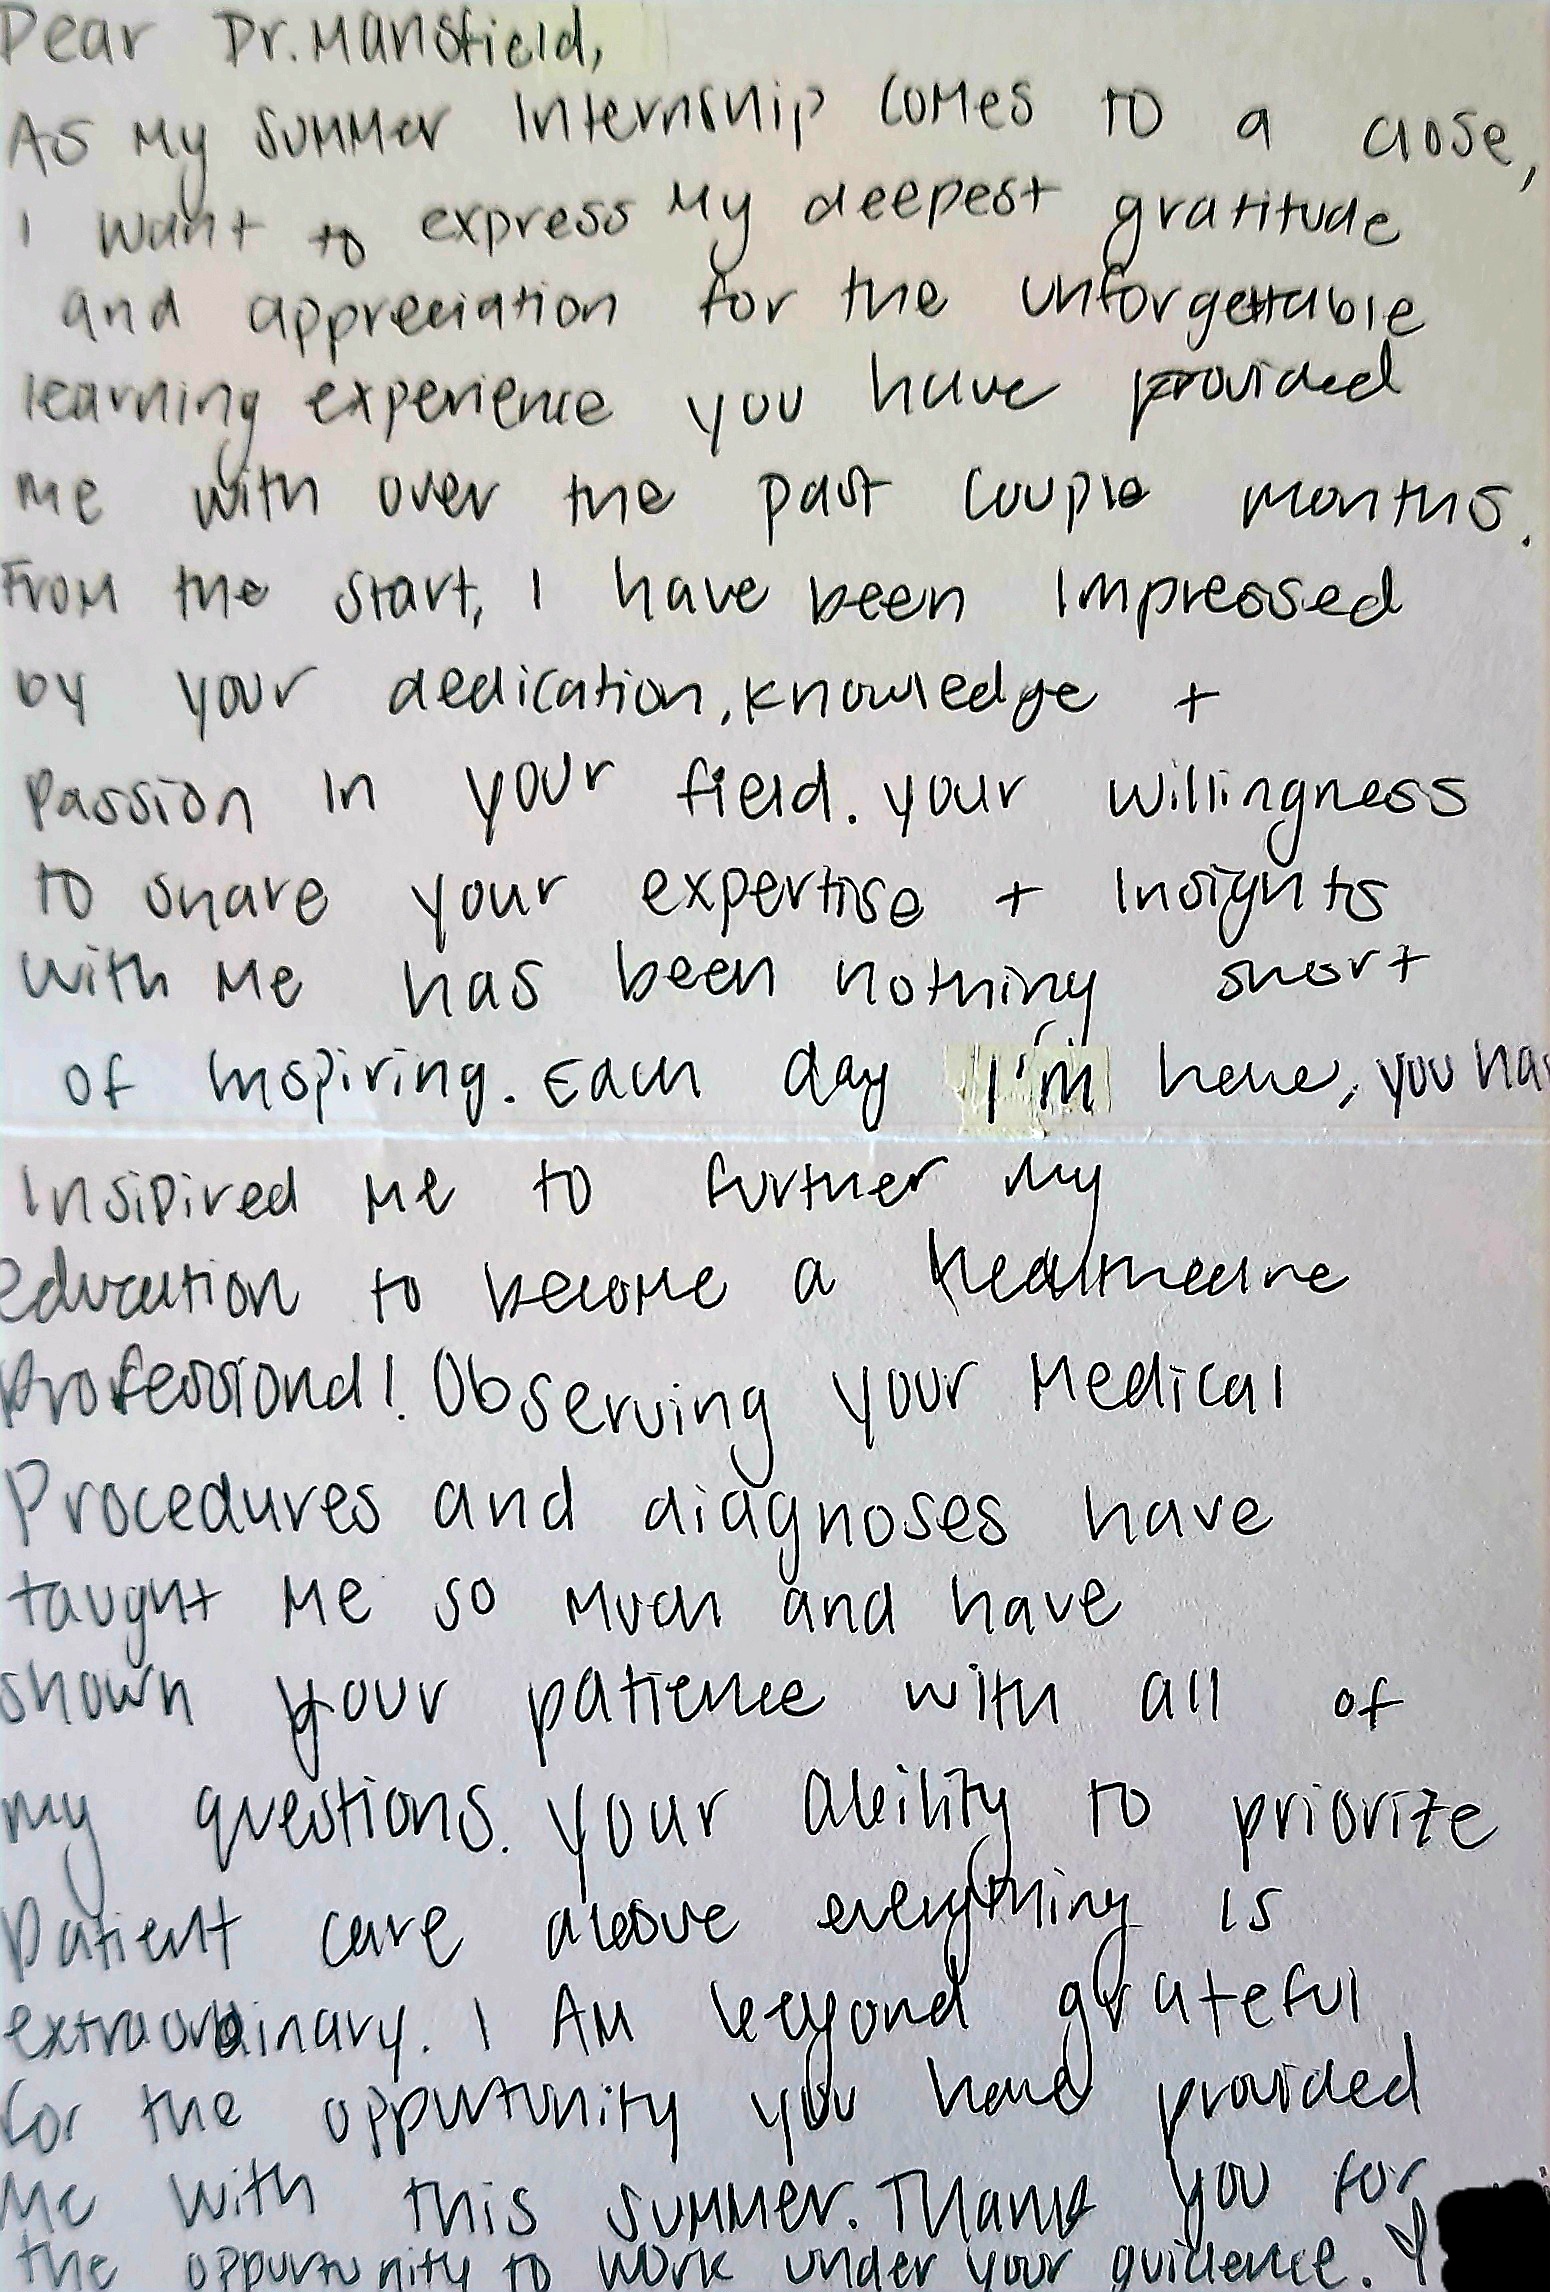 Heartfelt note from a student to Dr. Mansfield.